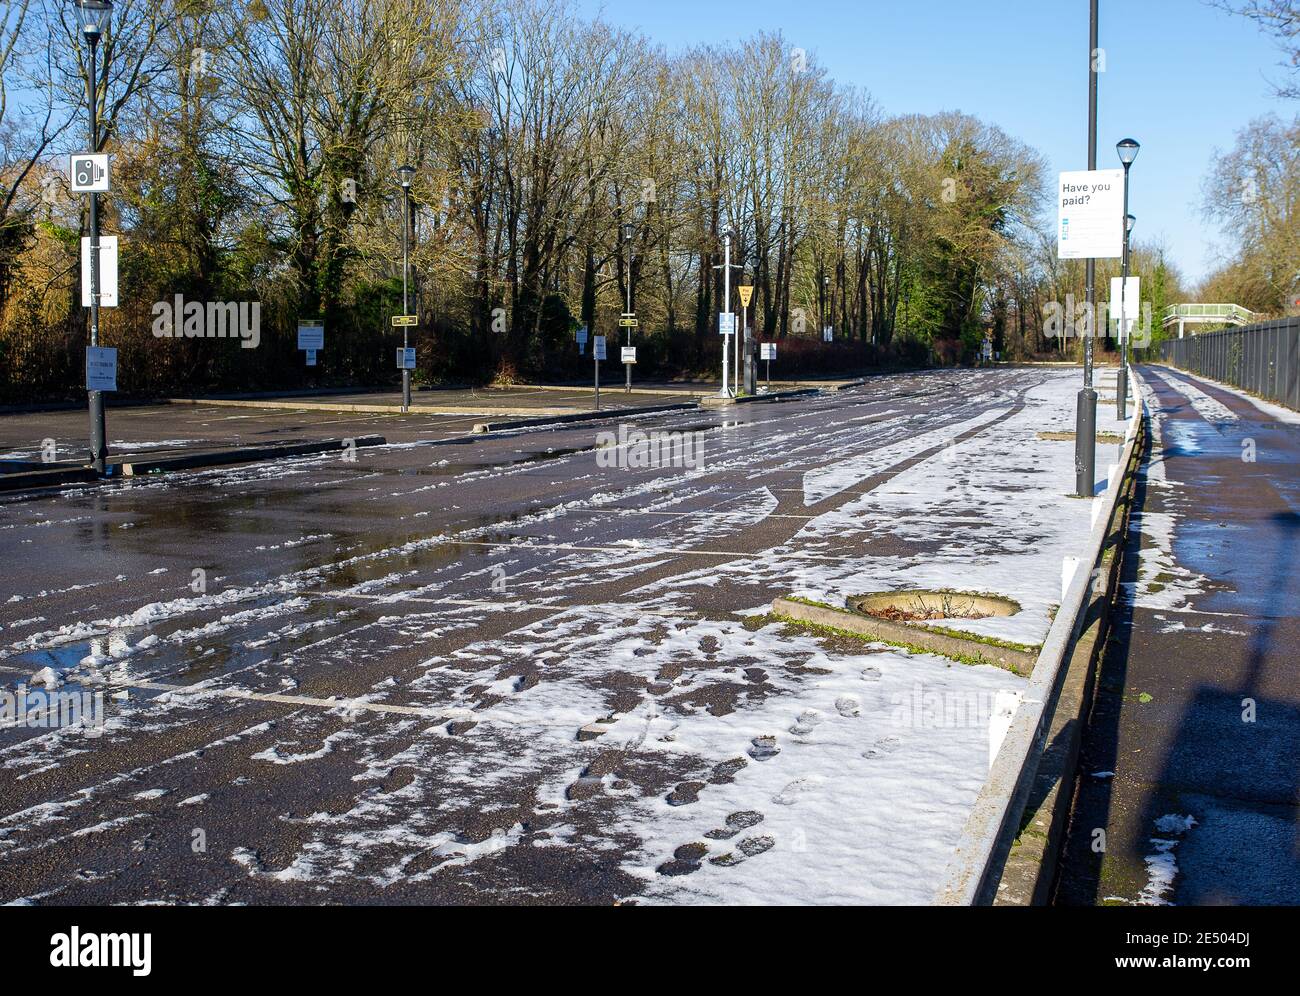 Windsor, Berkshire, UK. 25th Janaury, 2021. An empty icy commuter car park at Windsor & Eton Riverside station as many people continue to work from home during the Covid-19 lockdown. Credit: Maureen McLean/Alamy Live News Stock Photo